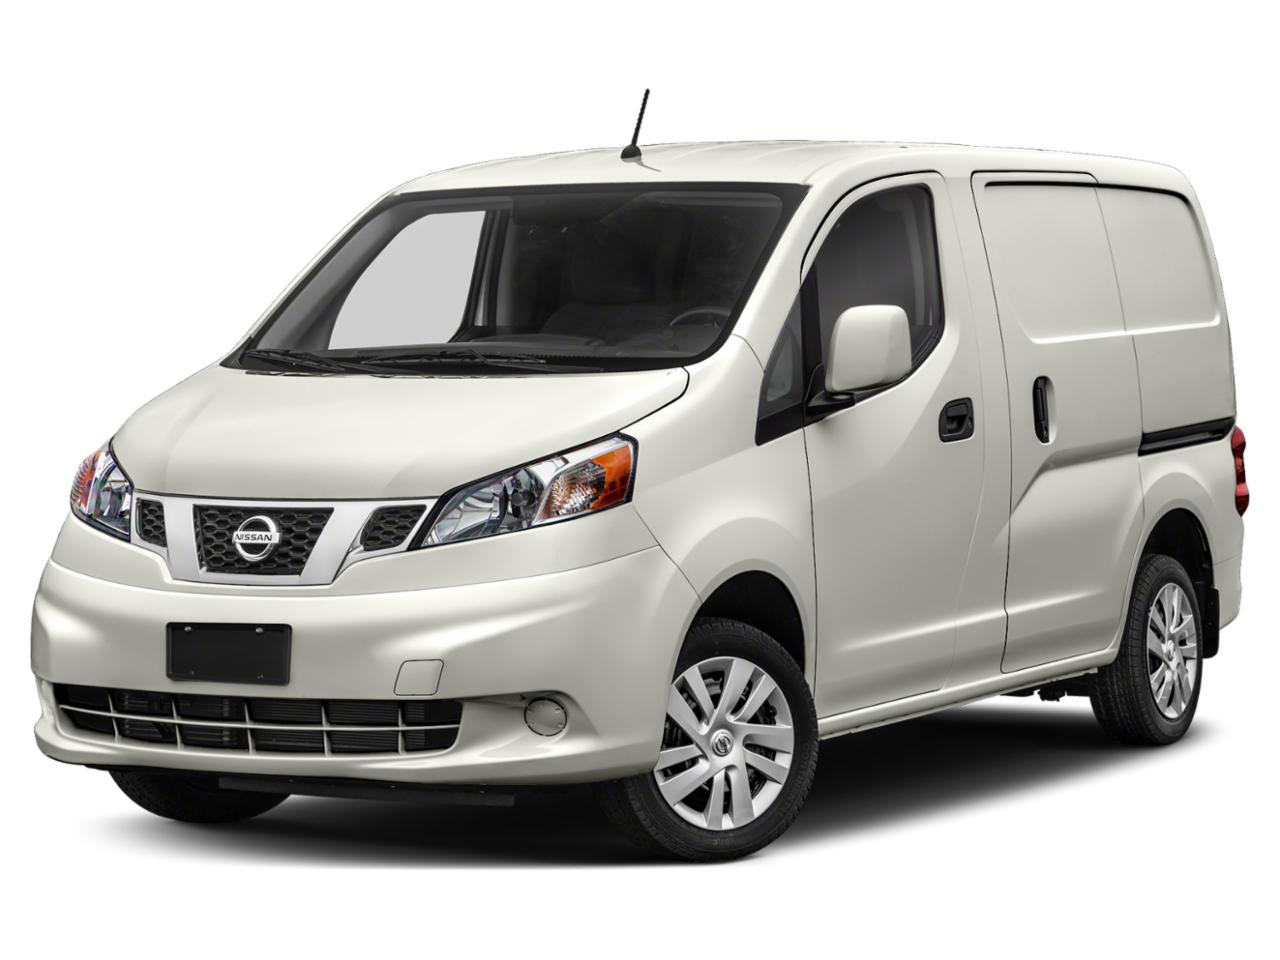 2019 Nissan NV200 Compact Cargo Vehicle Photo in Appleton, WI 54913